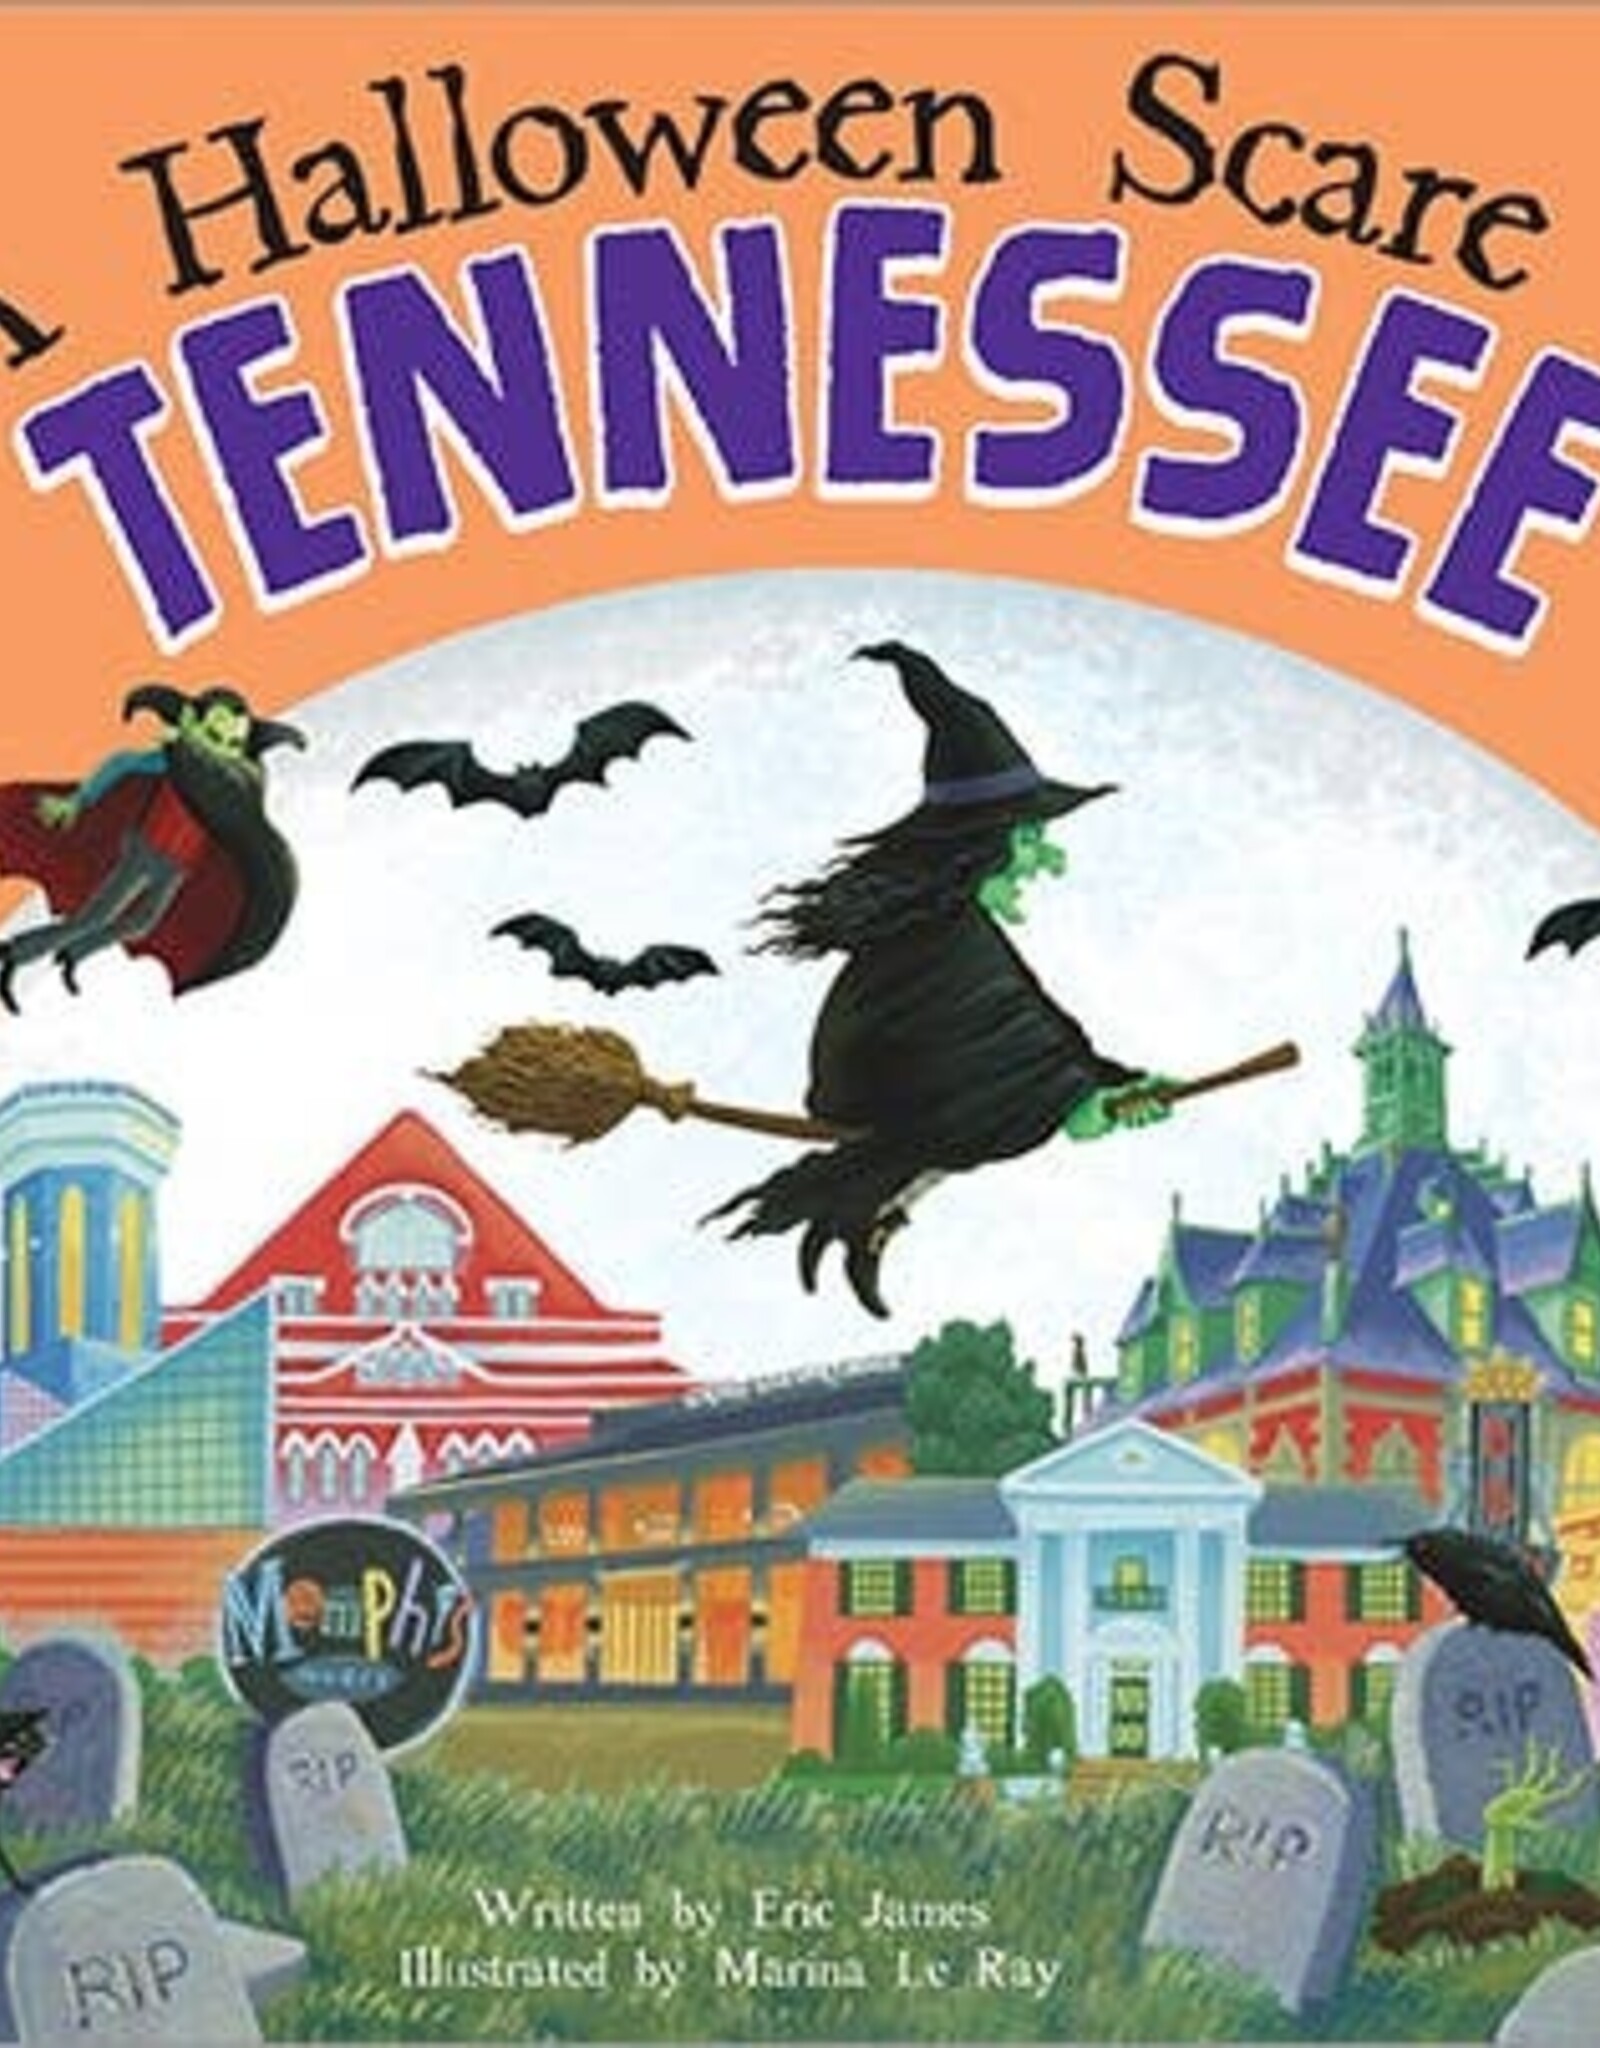 Sourcebooks Halloween Scare in Tennessee